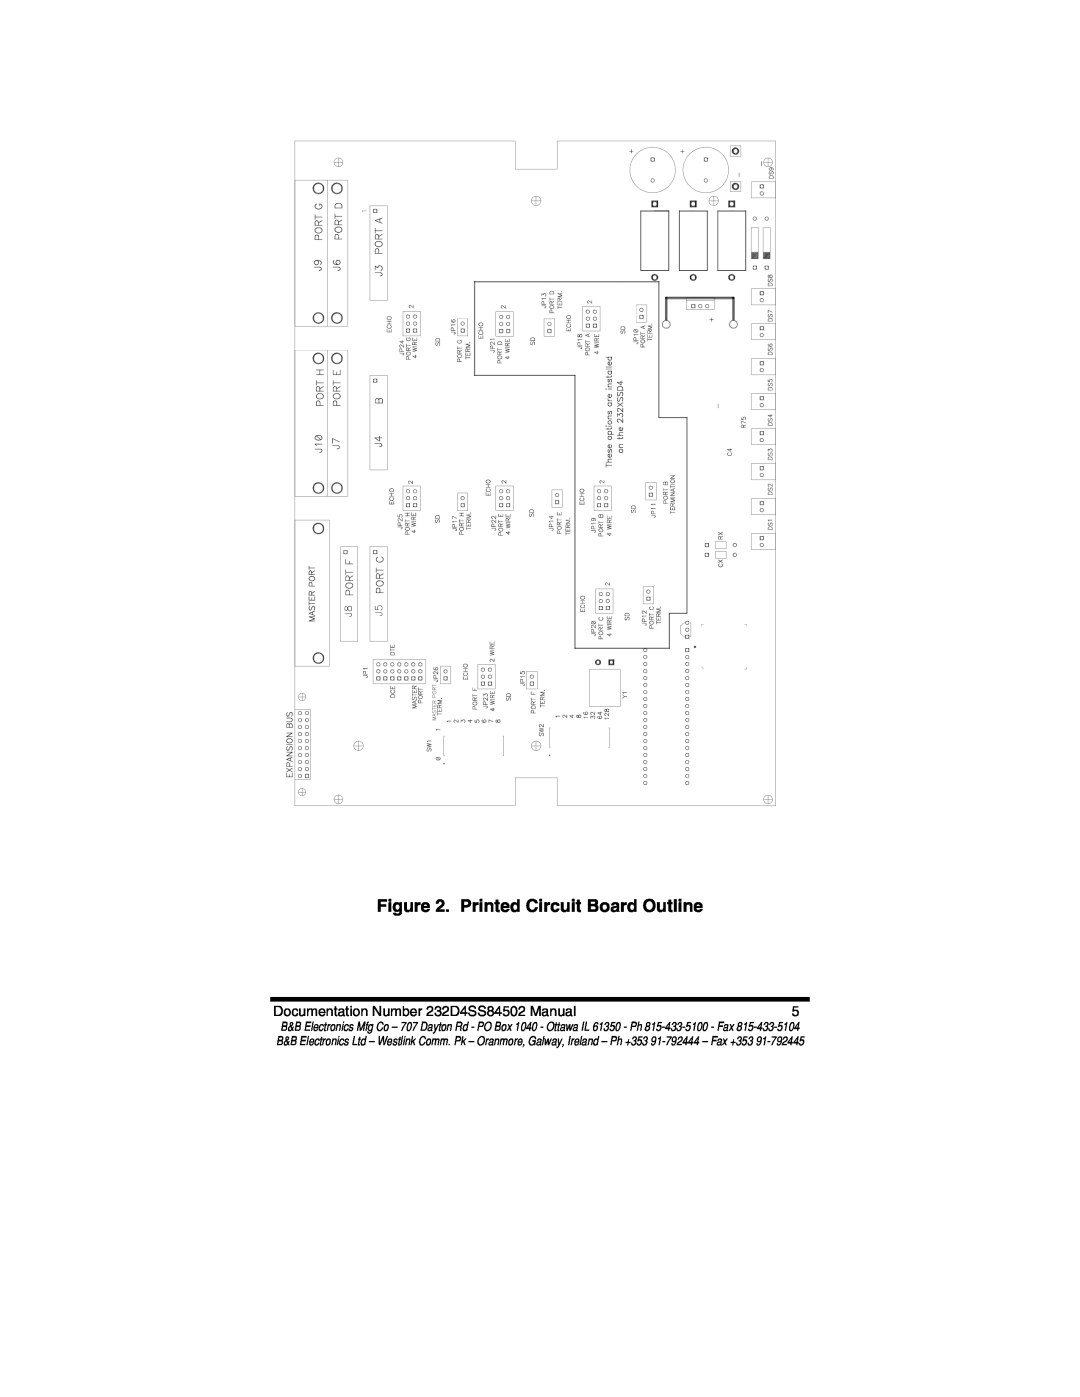 B&B Electronics manual Printed Circuit Board Outline, Documentation Number 232D4SS84502 Manual 